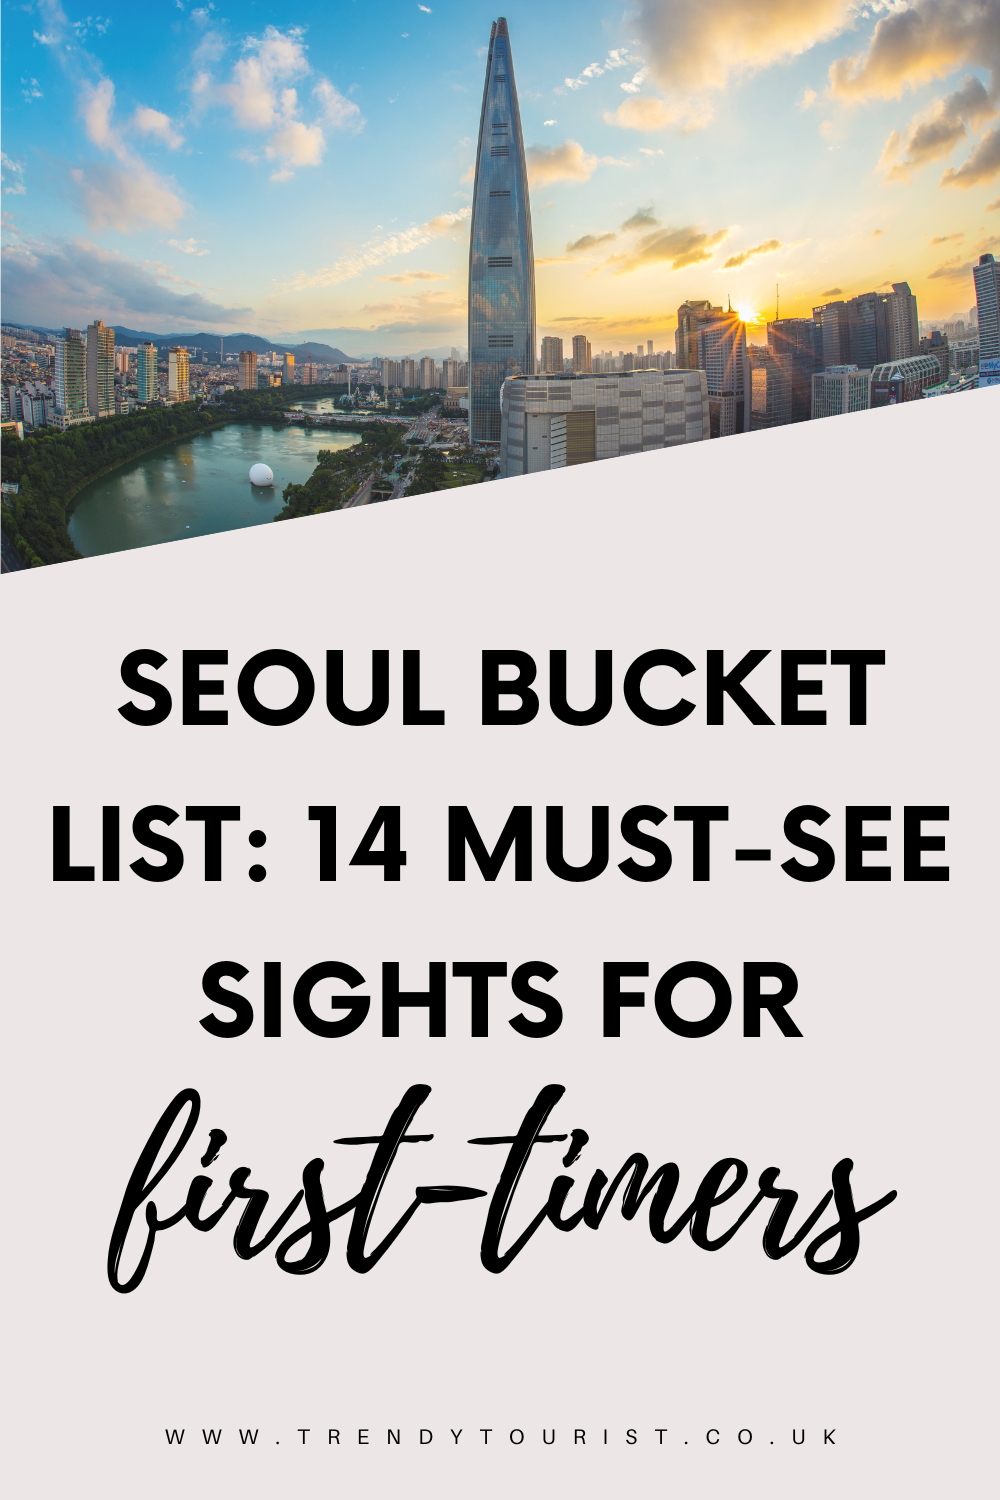 Seoul Bucket List 14 Must-See Sights for First-Timers